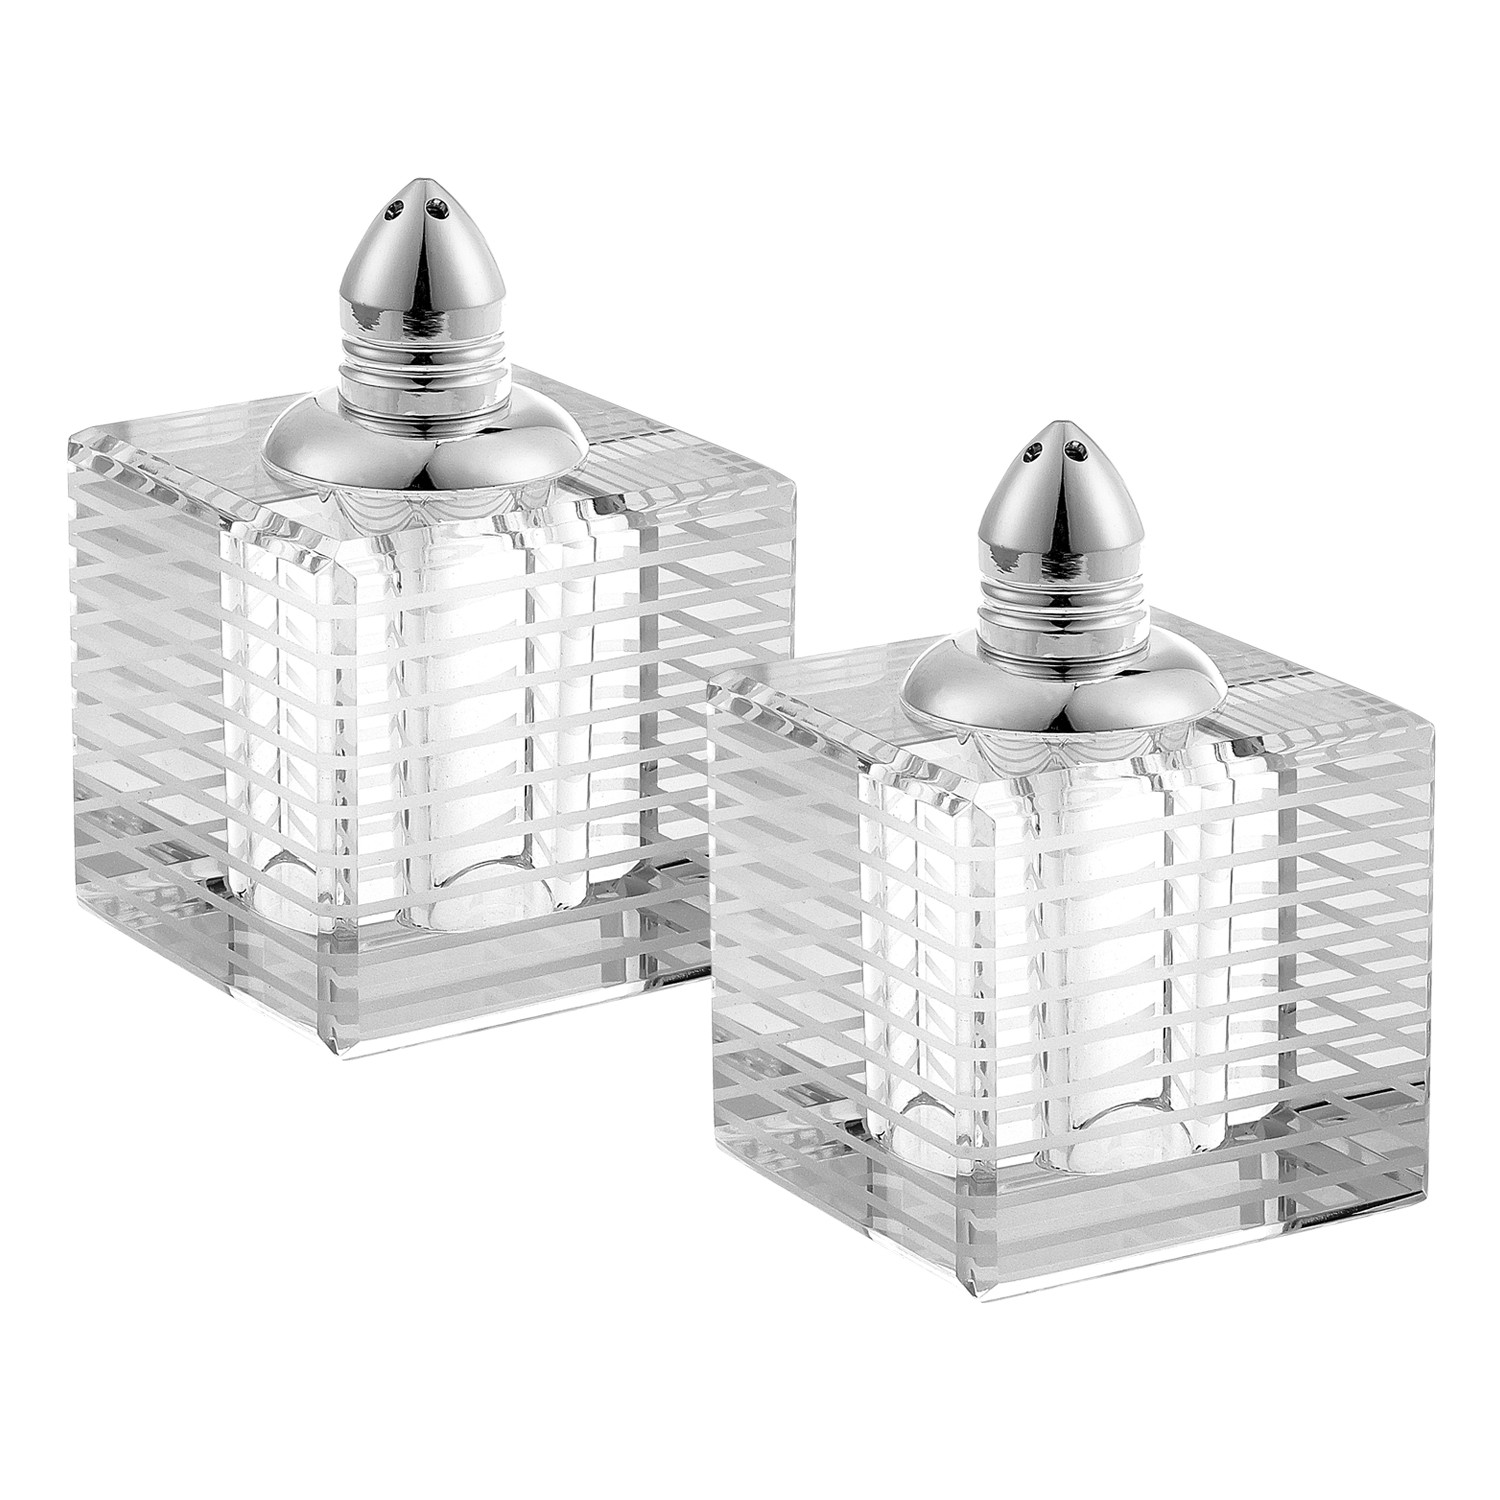 Hand Made Crystal Silver Pair of Salt & Pepper Shakers